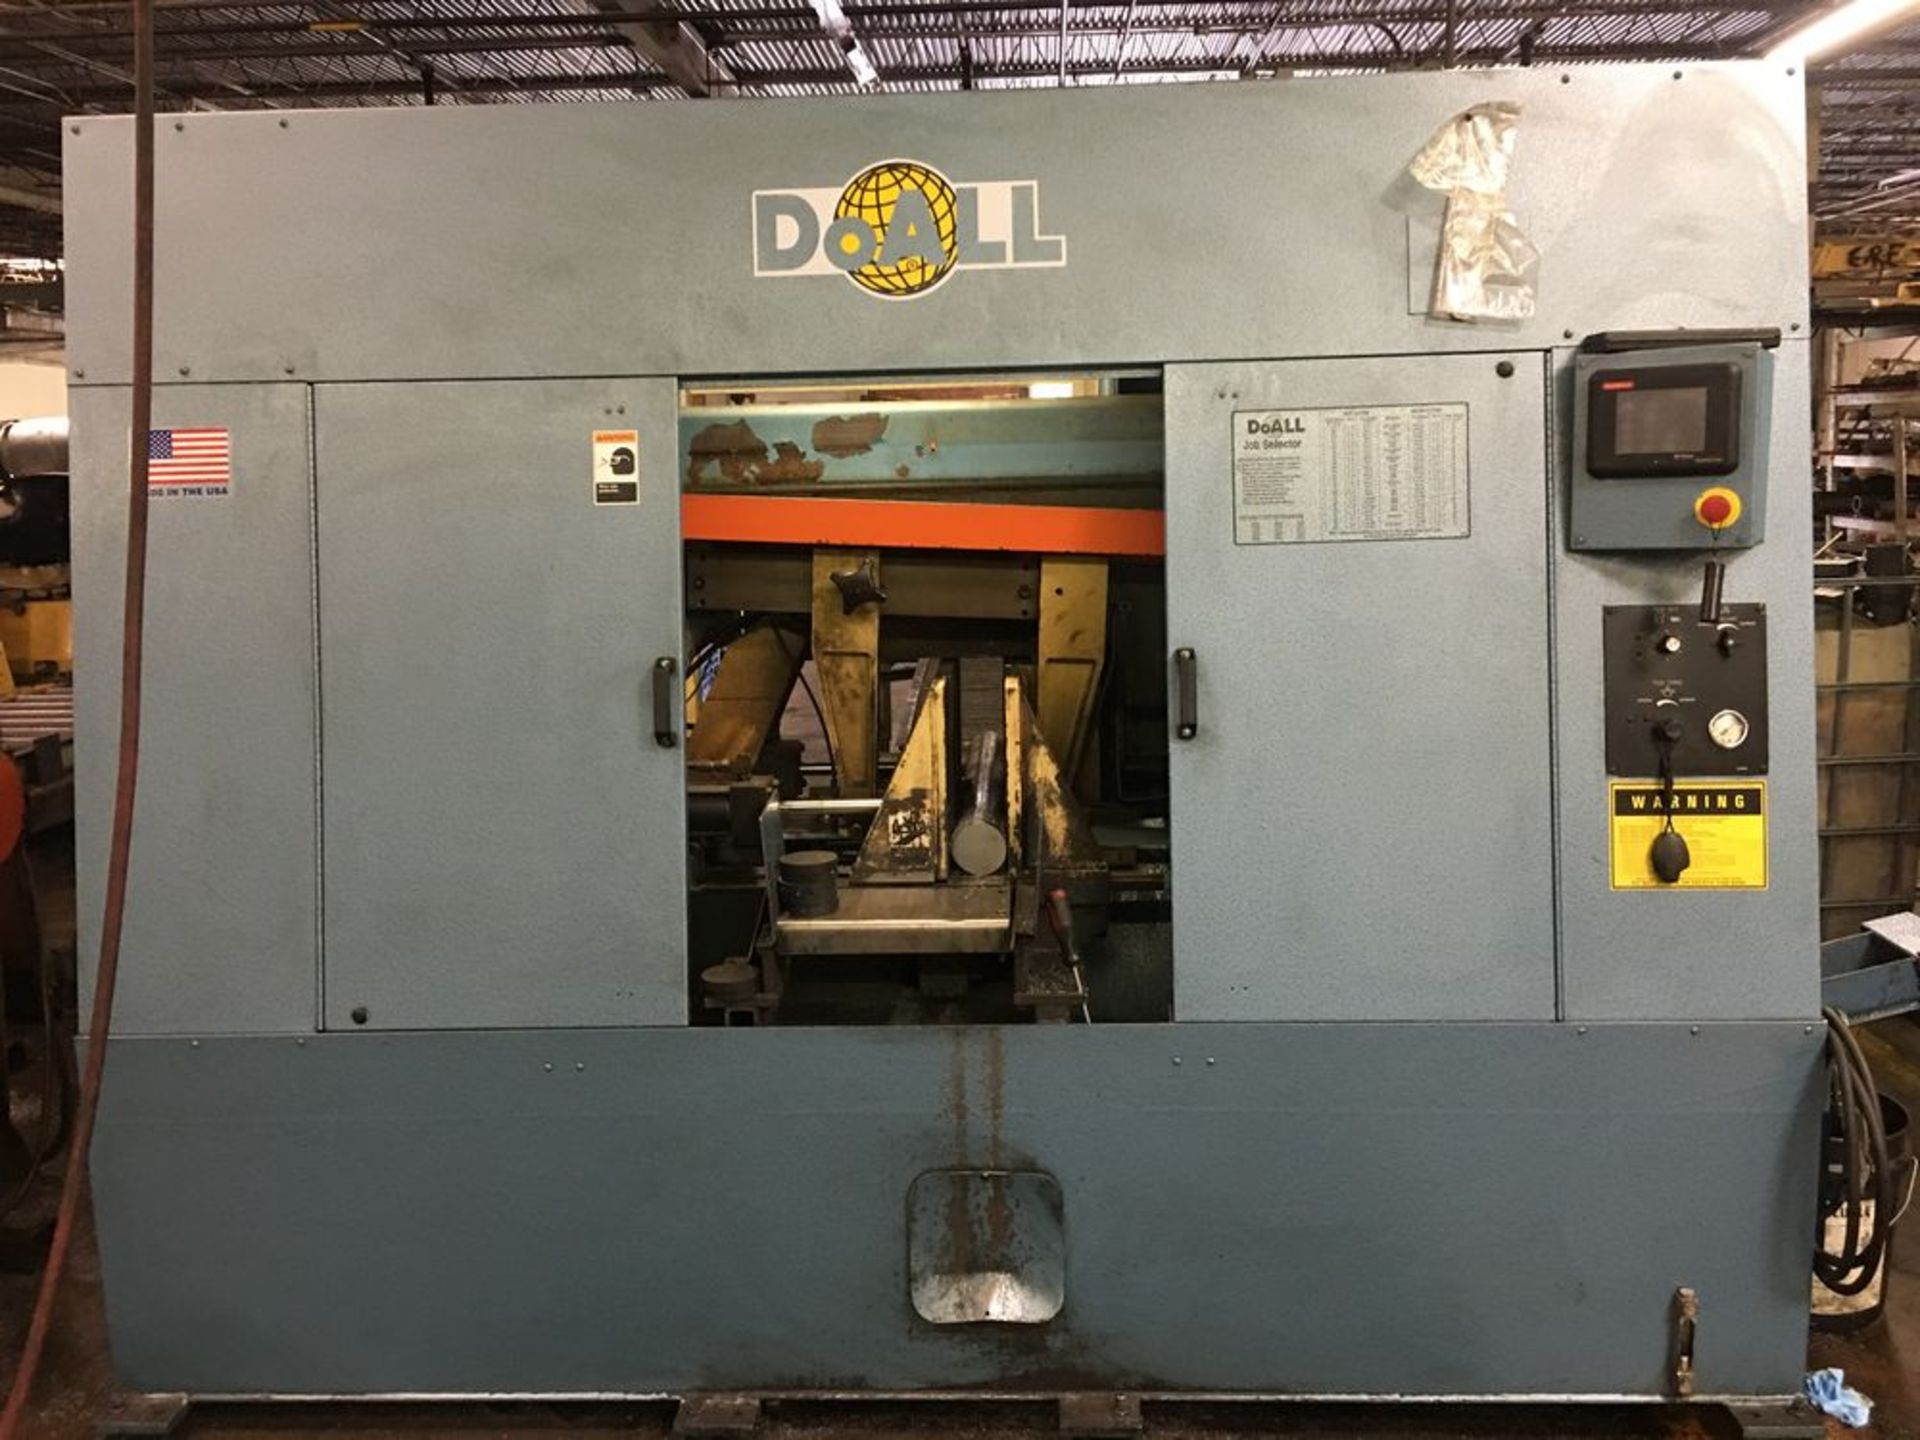 DoAll Automatic Band Saw with Auto Bundle Loader Model C3350NC, S/N 566-08135R1, NEW 2013